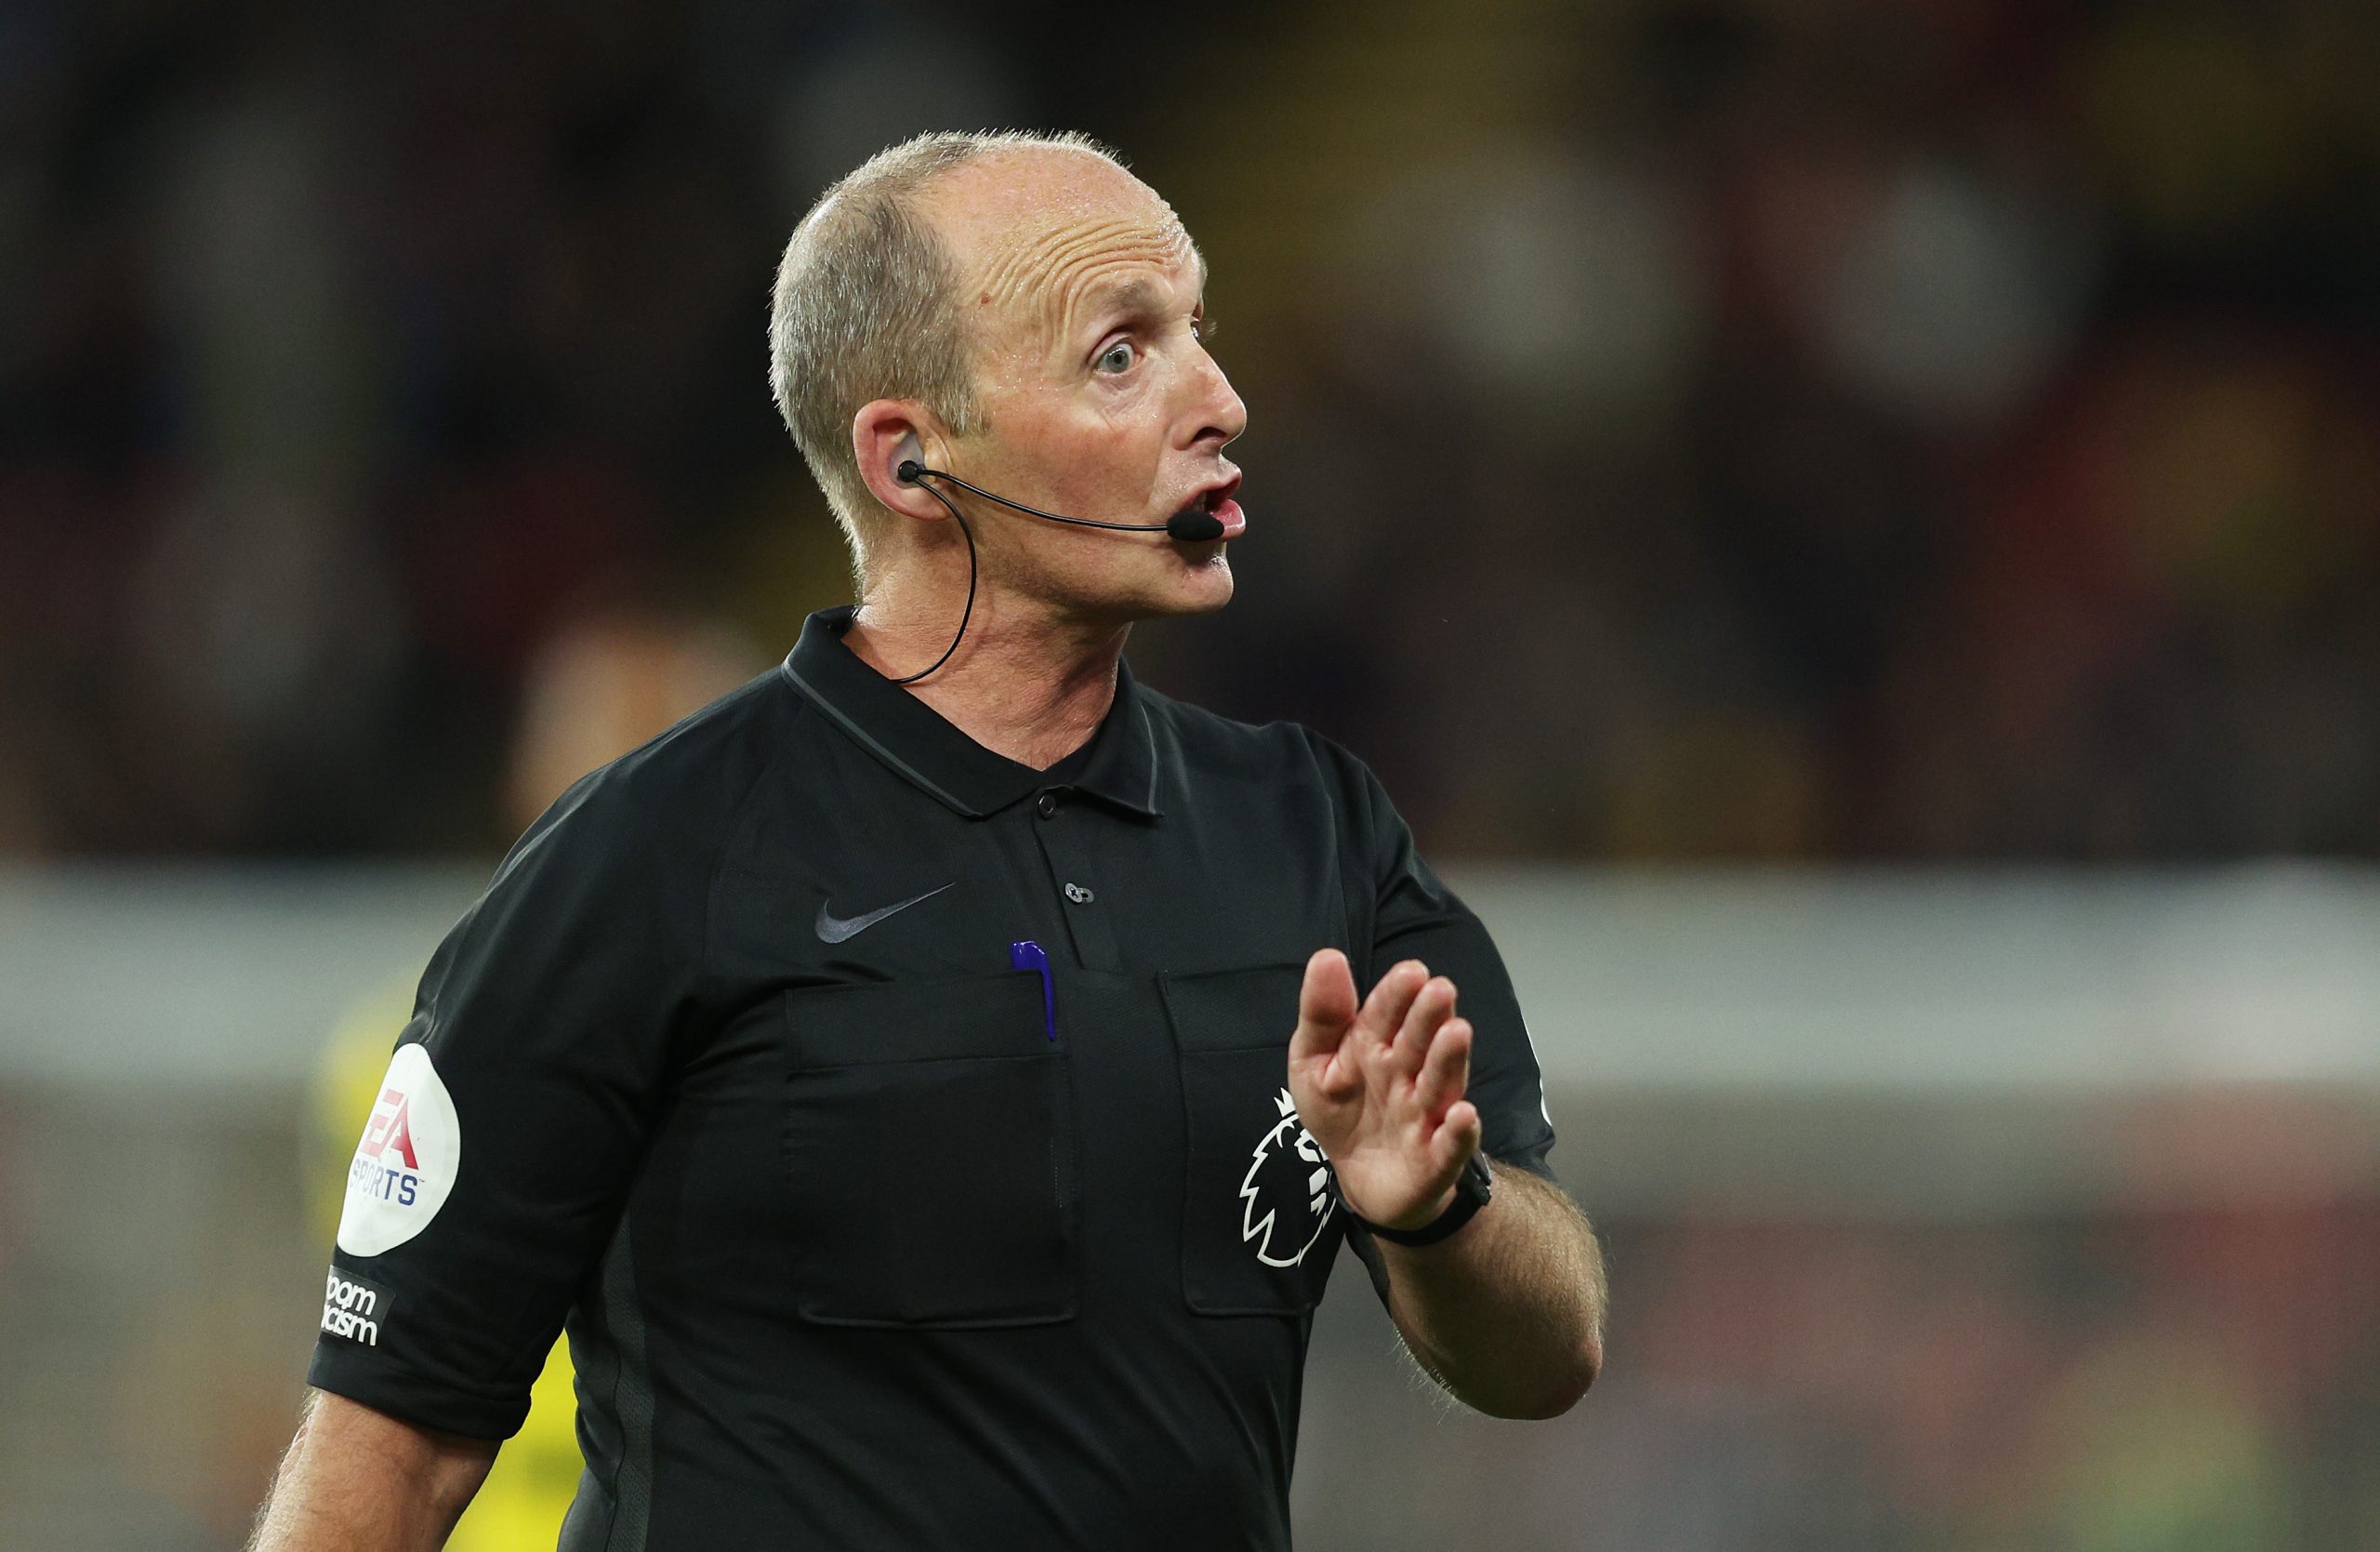 Mike Dean reacts during the Premier League match between Watford and Everton.